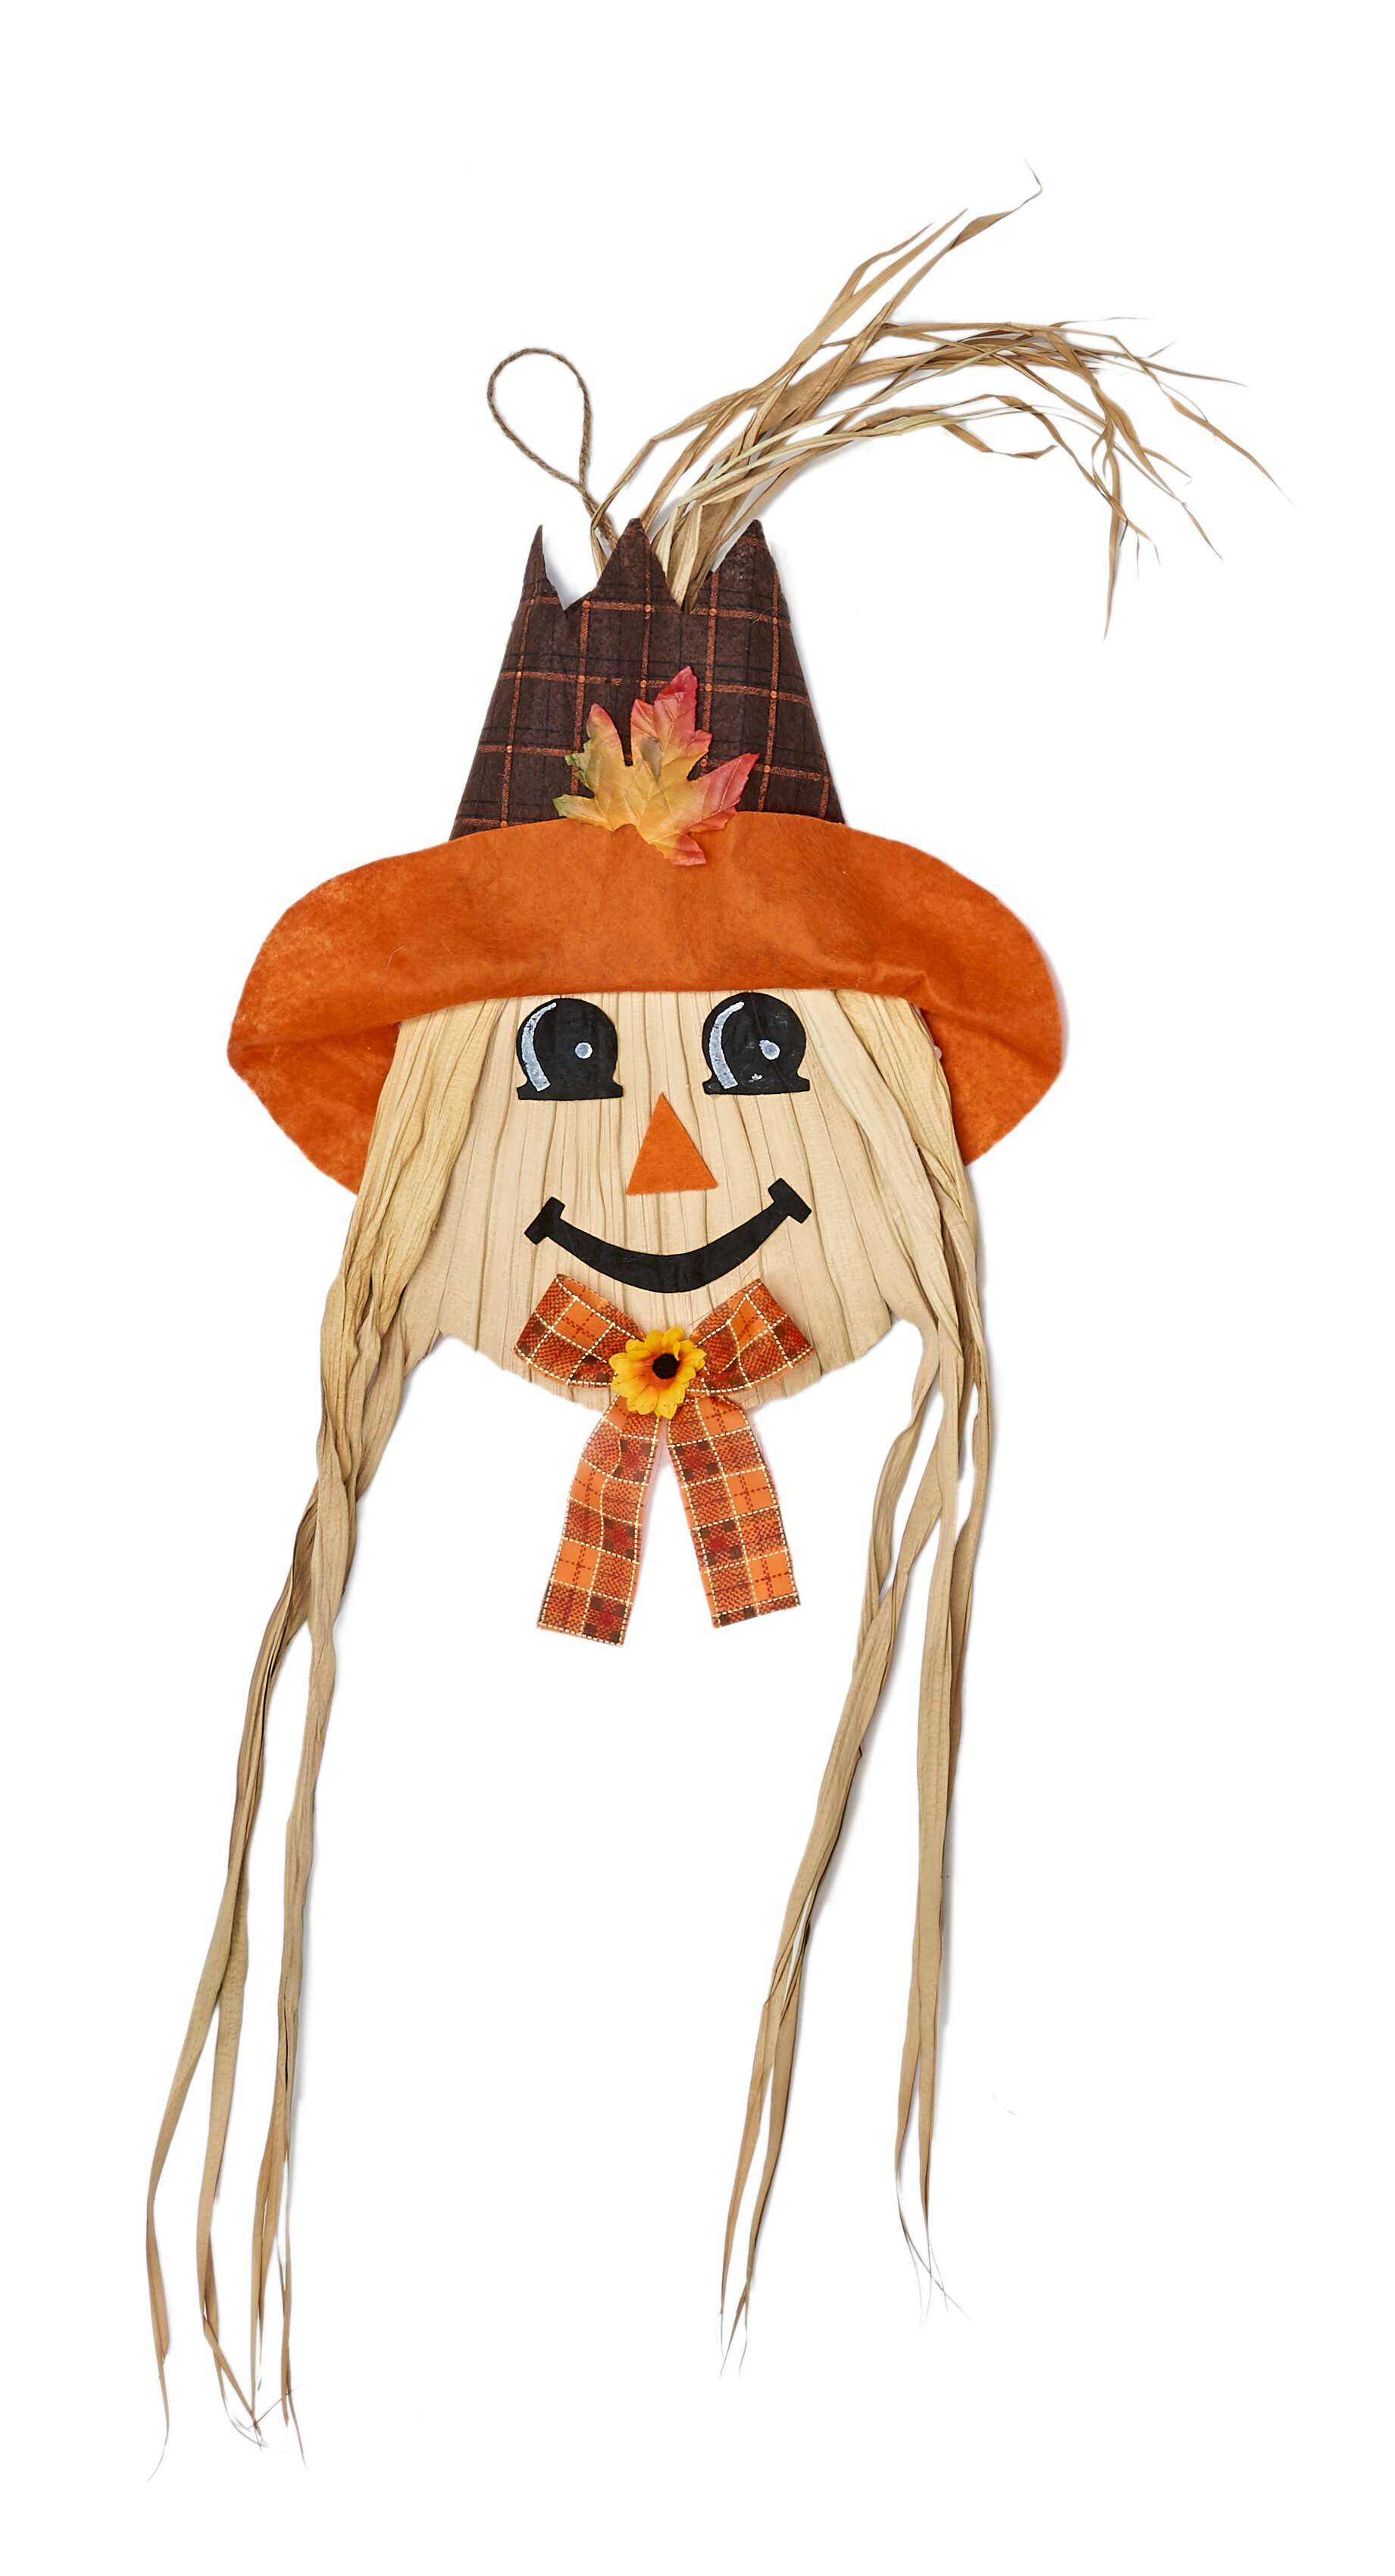 Download The Holiday Aisle Hanging Corn Straw Scarecrow Face Figurine Wayfair